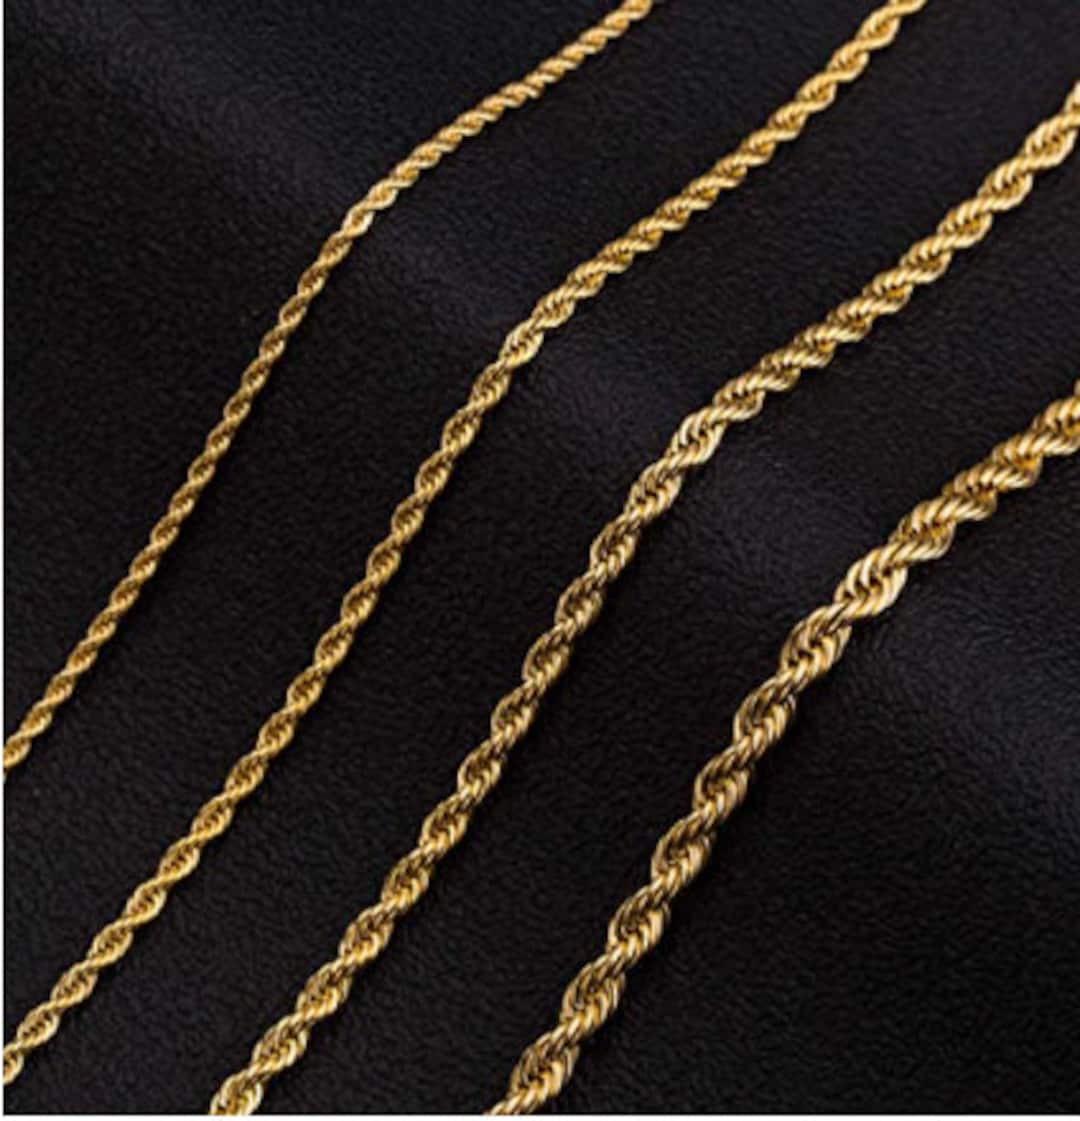 14K Gold Rope Chain Necklace, Solid Chain, Layering Necklace, Dainty,  Chunky, Over 925 Sterling Silver, 2.5-5MM, 1630, for Her,him, SALE 